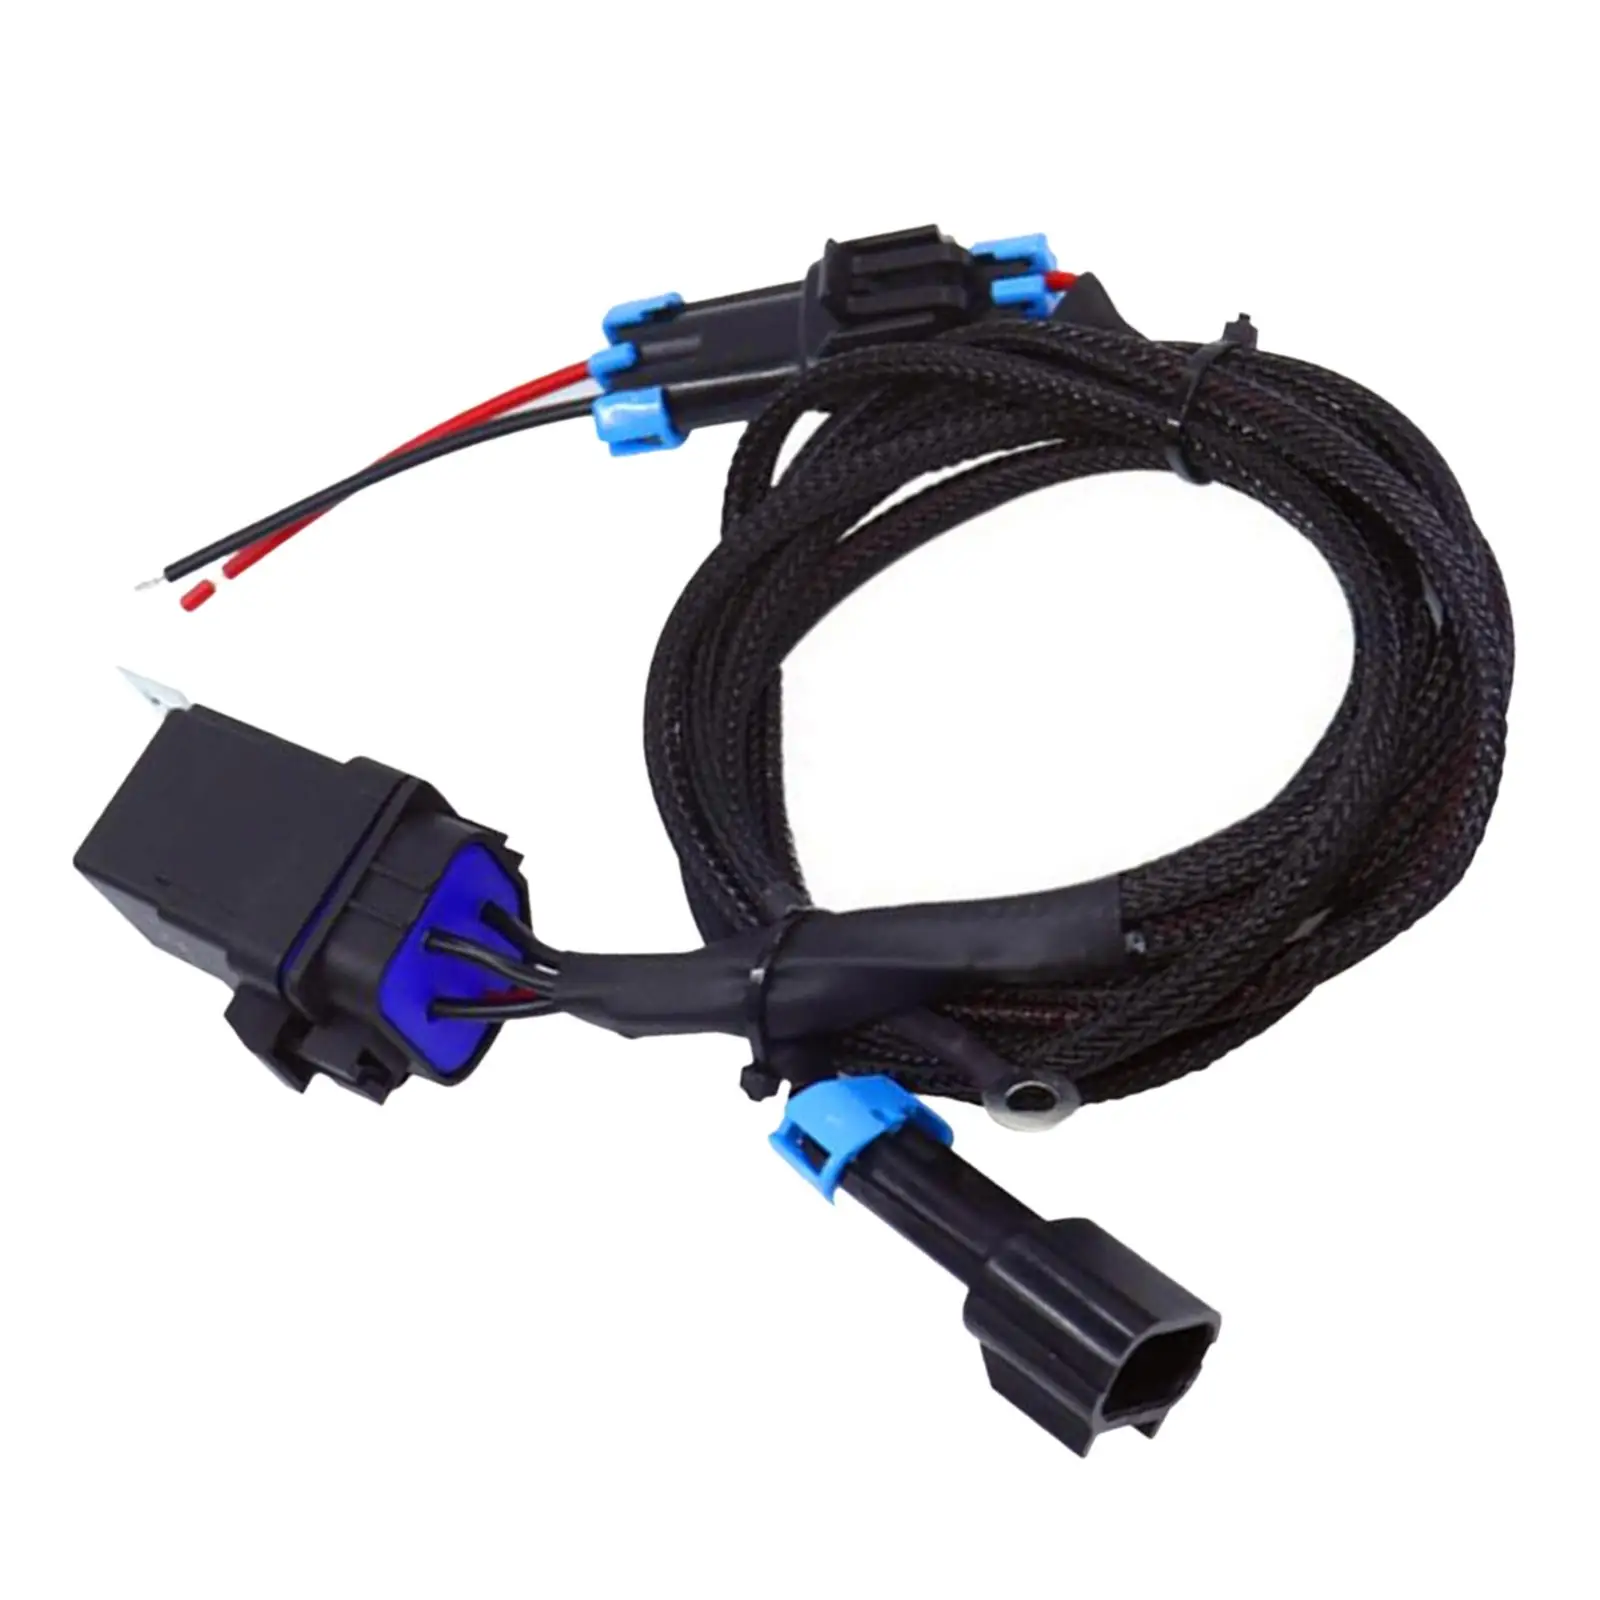 Vehicles Reverse Light Wiring Harness Replacement Backup Light Harness for Polaris Ranger XP 1000 3-seat and Crew 2019-2020